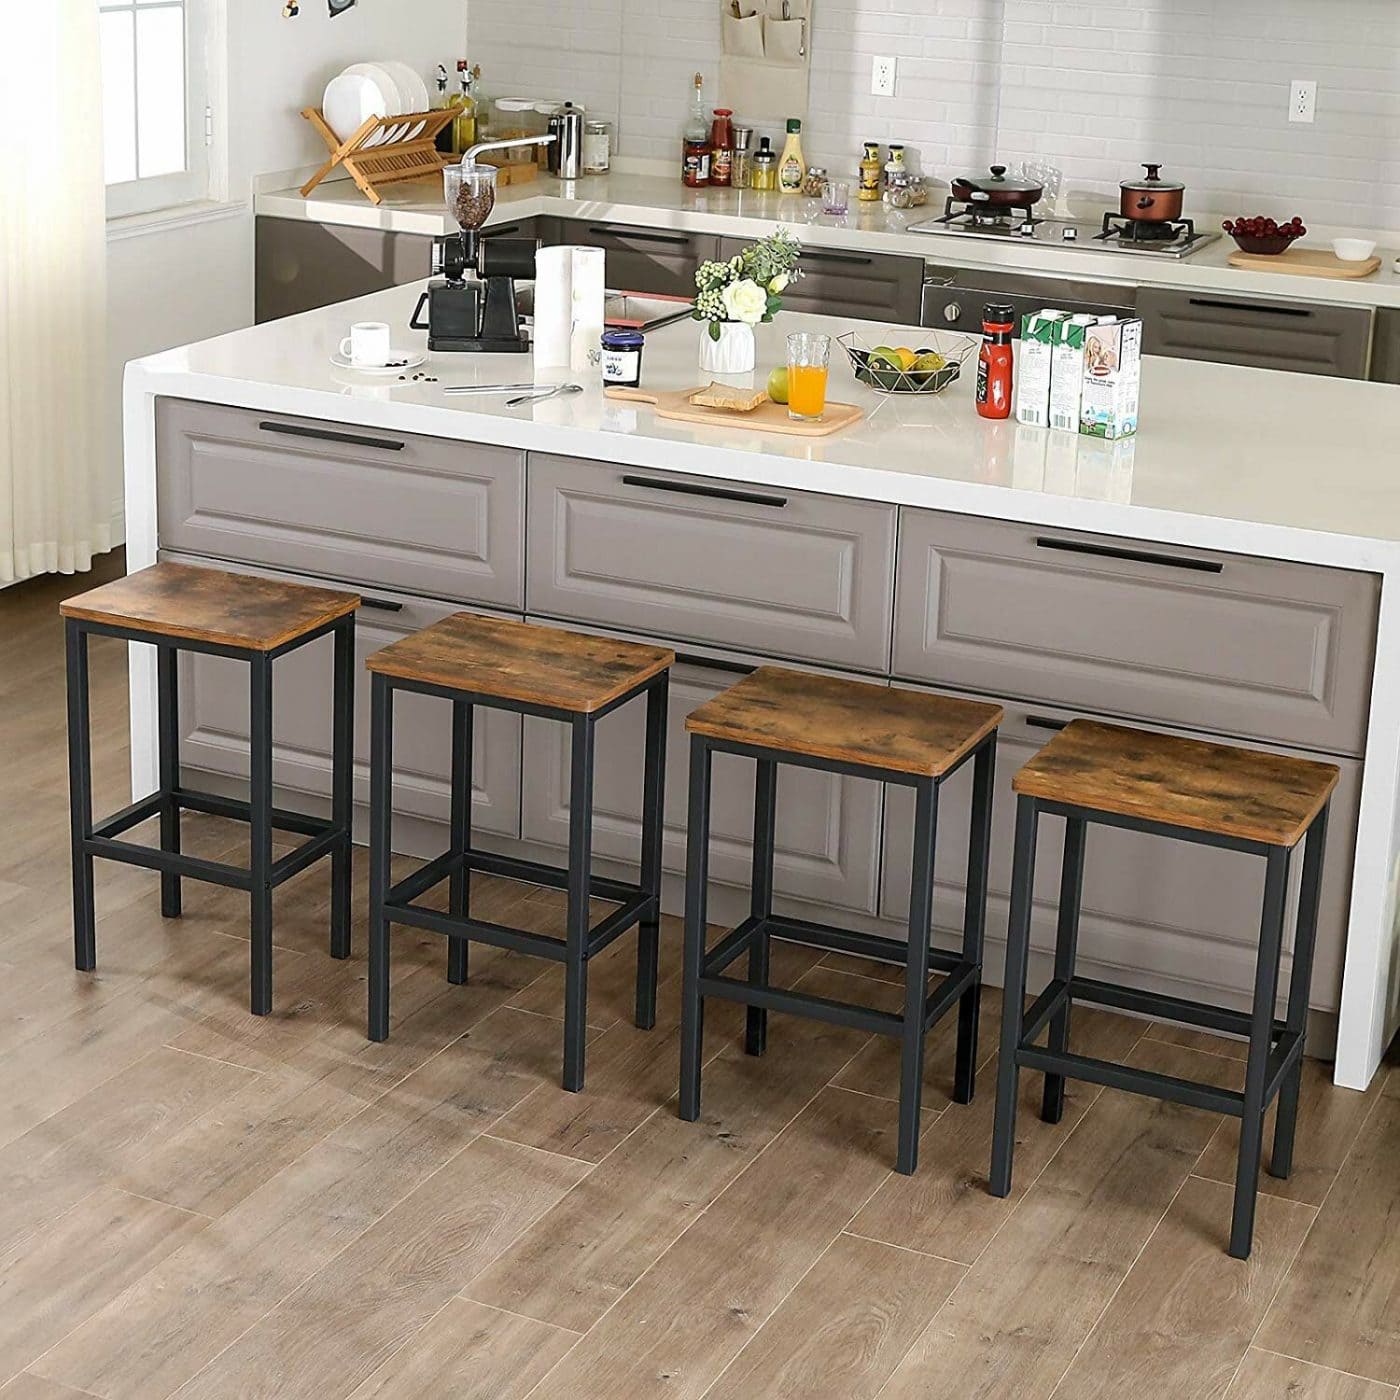 9 Save Space With Compact Kitchen Island Bar Stools 1400x1400 